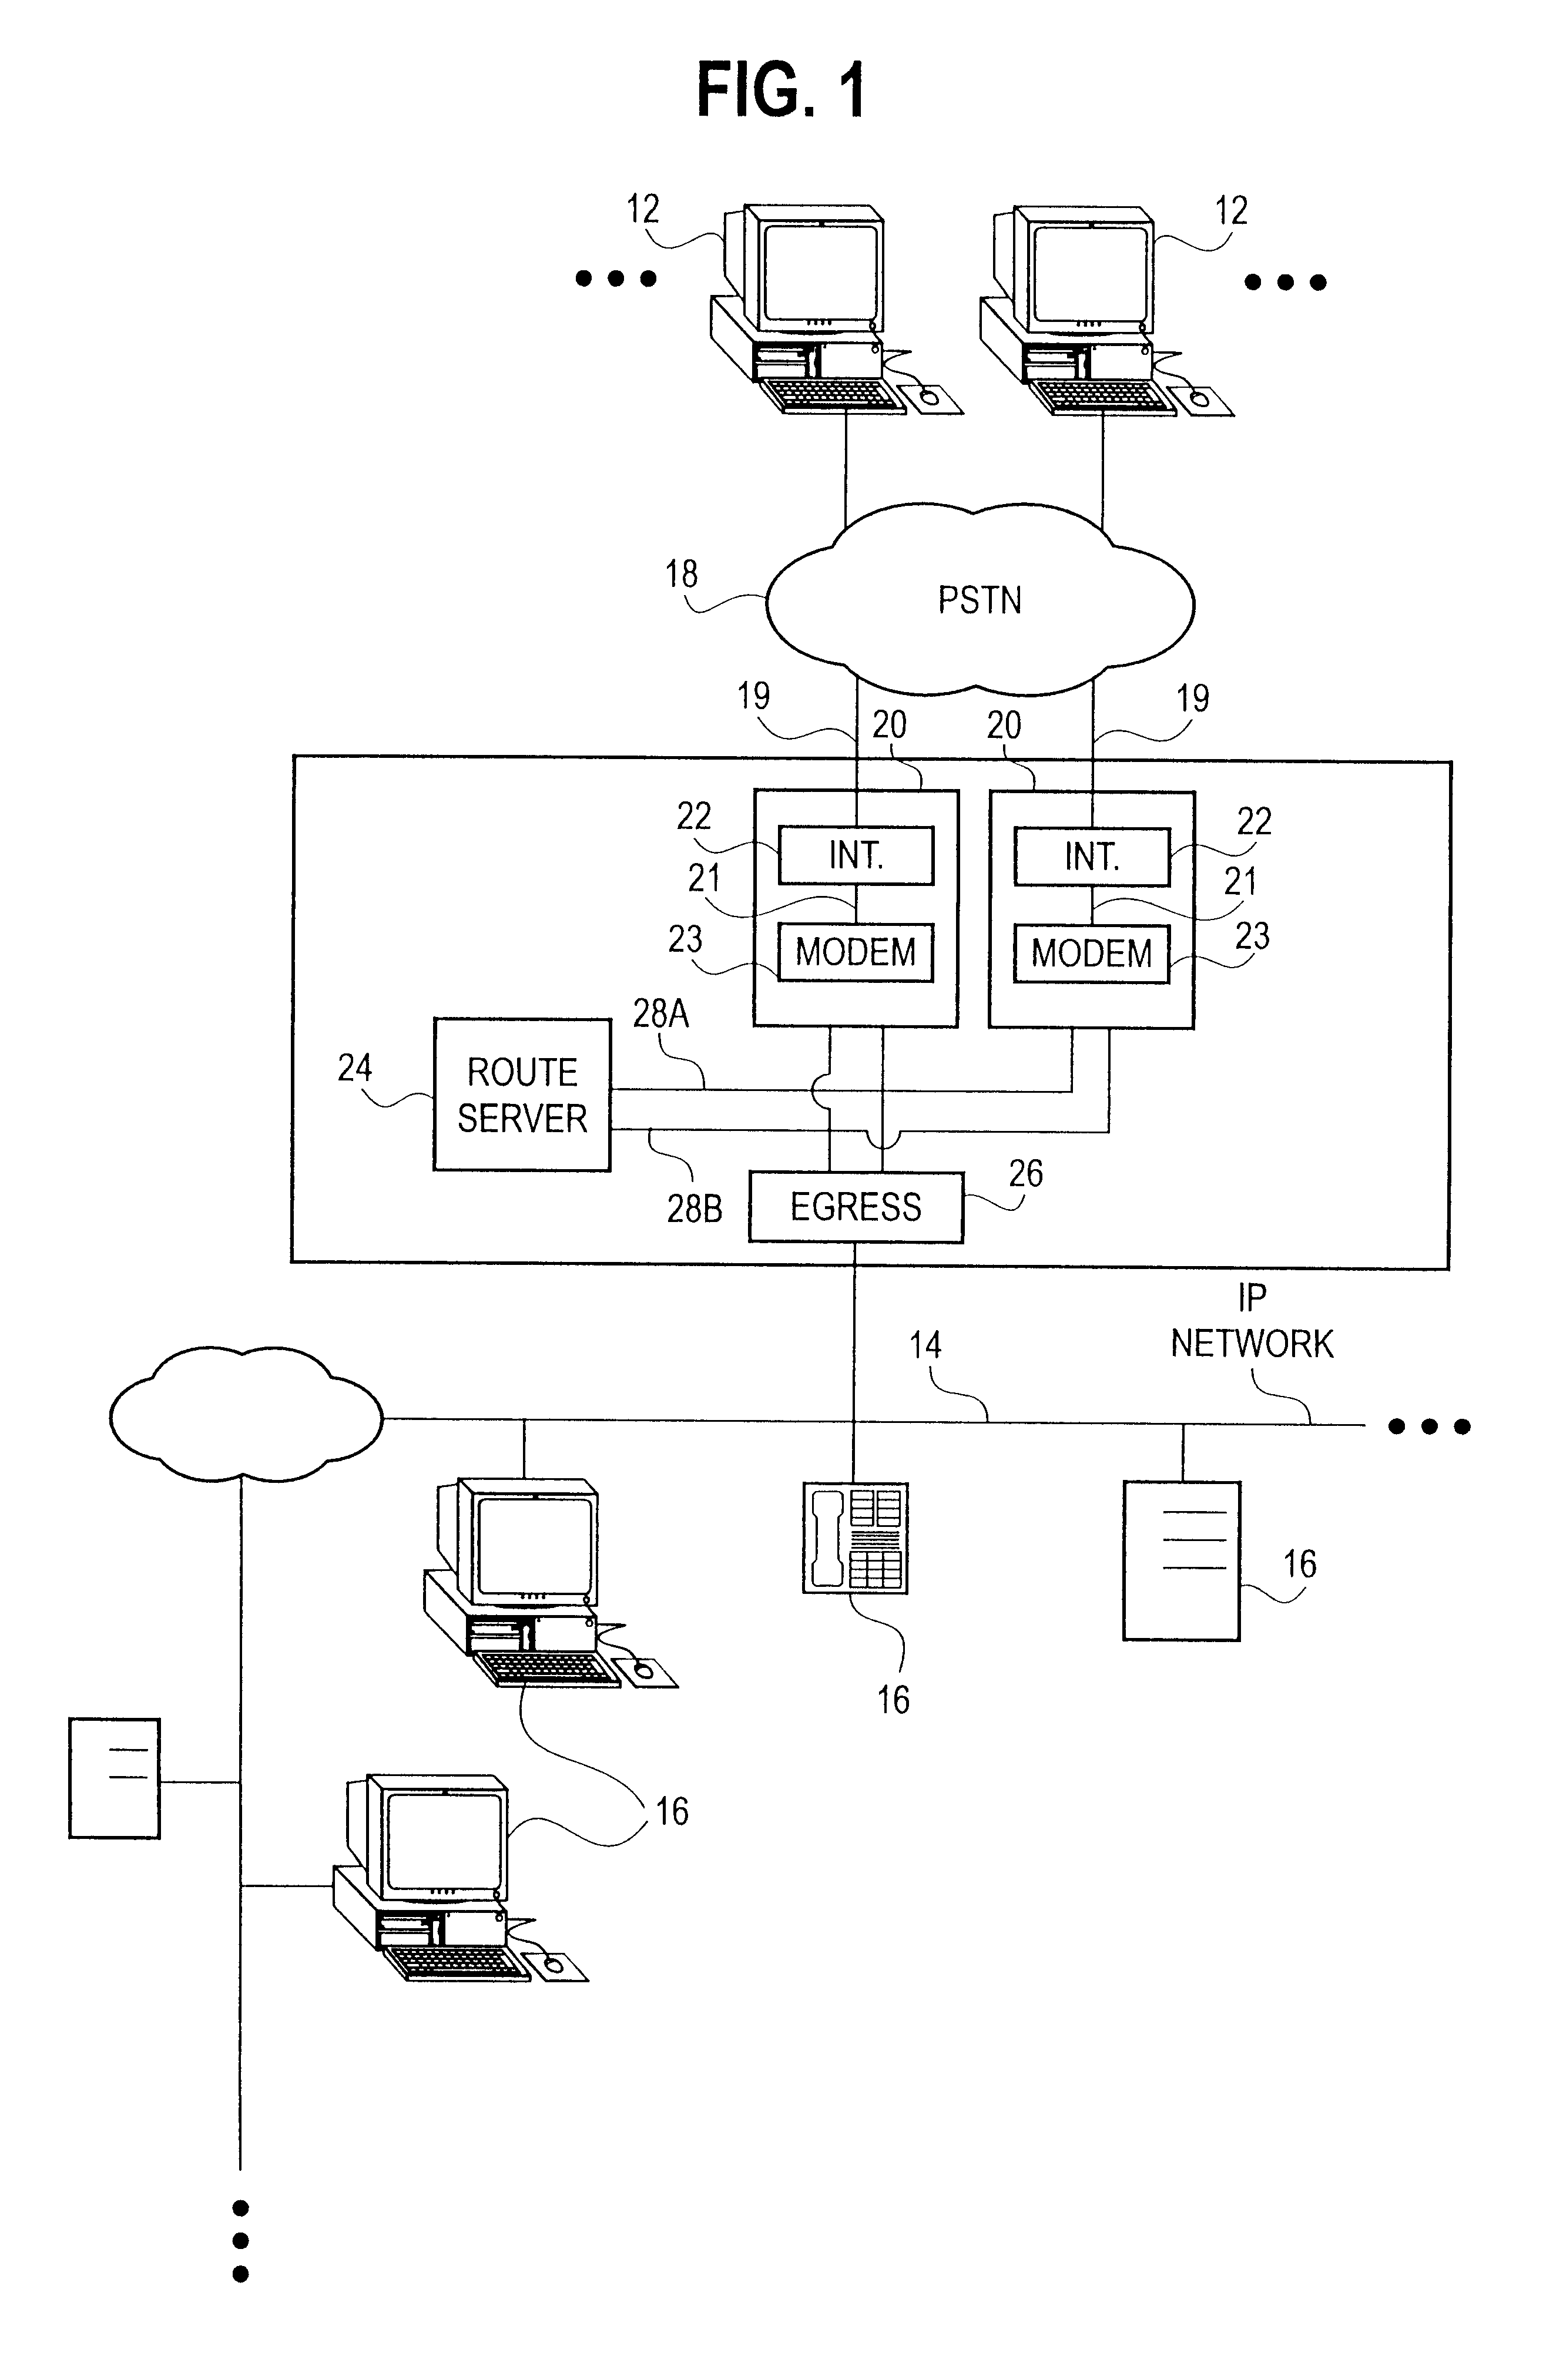 Distributed protocol processing and packet forwarding using tunneling protocols